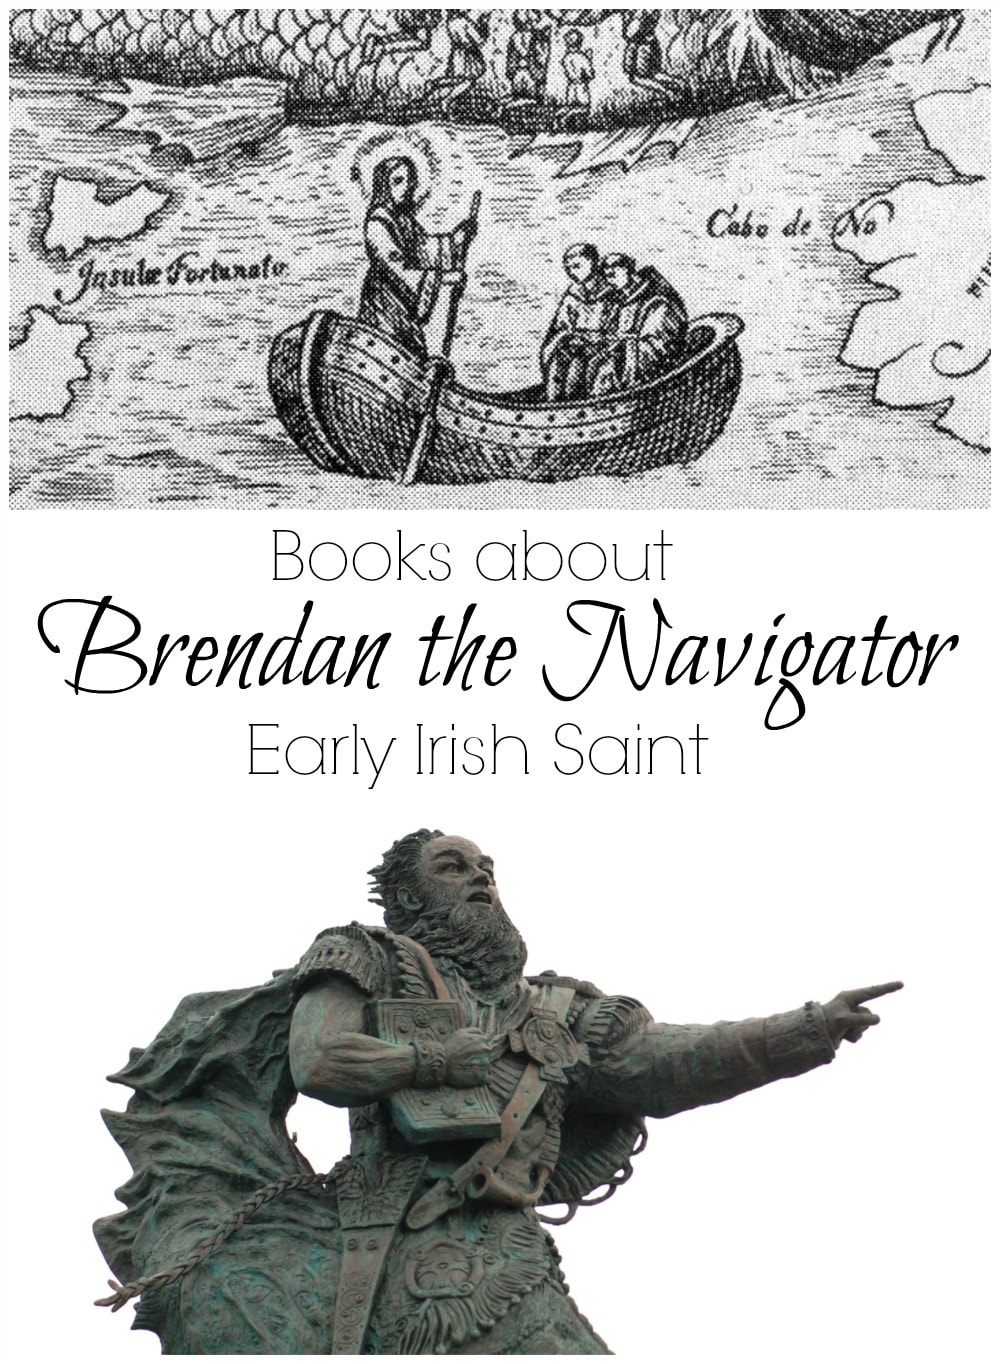 Books about Brendan the Navigator - another famous Irish Saint who doesn't get as much attention as St. Patrick.